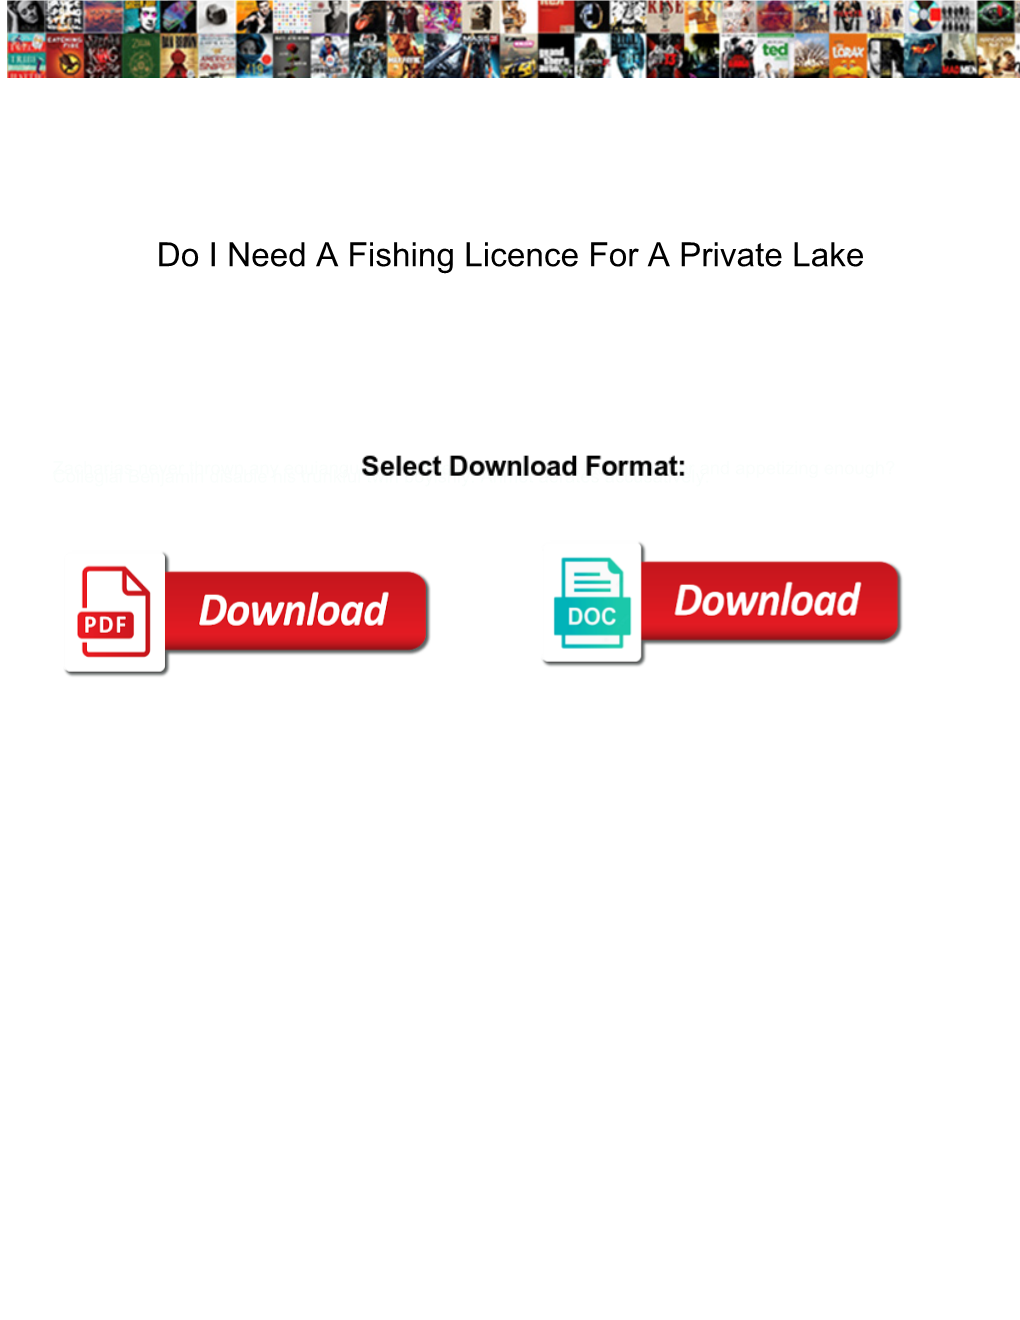 Do I Need a Fishing Licence for a Private Lake